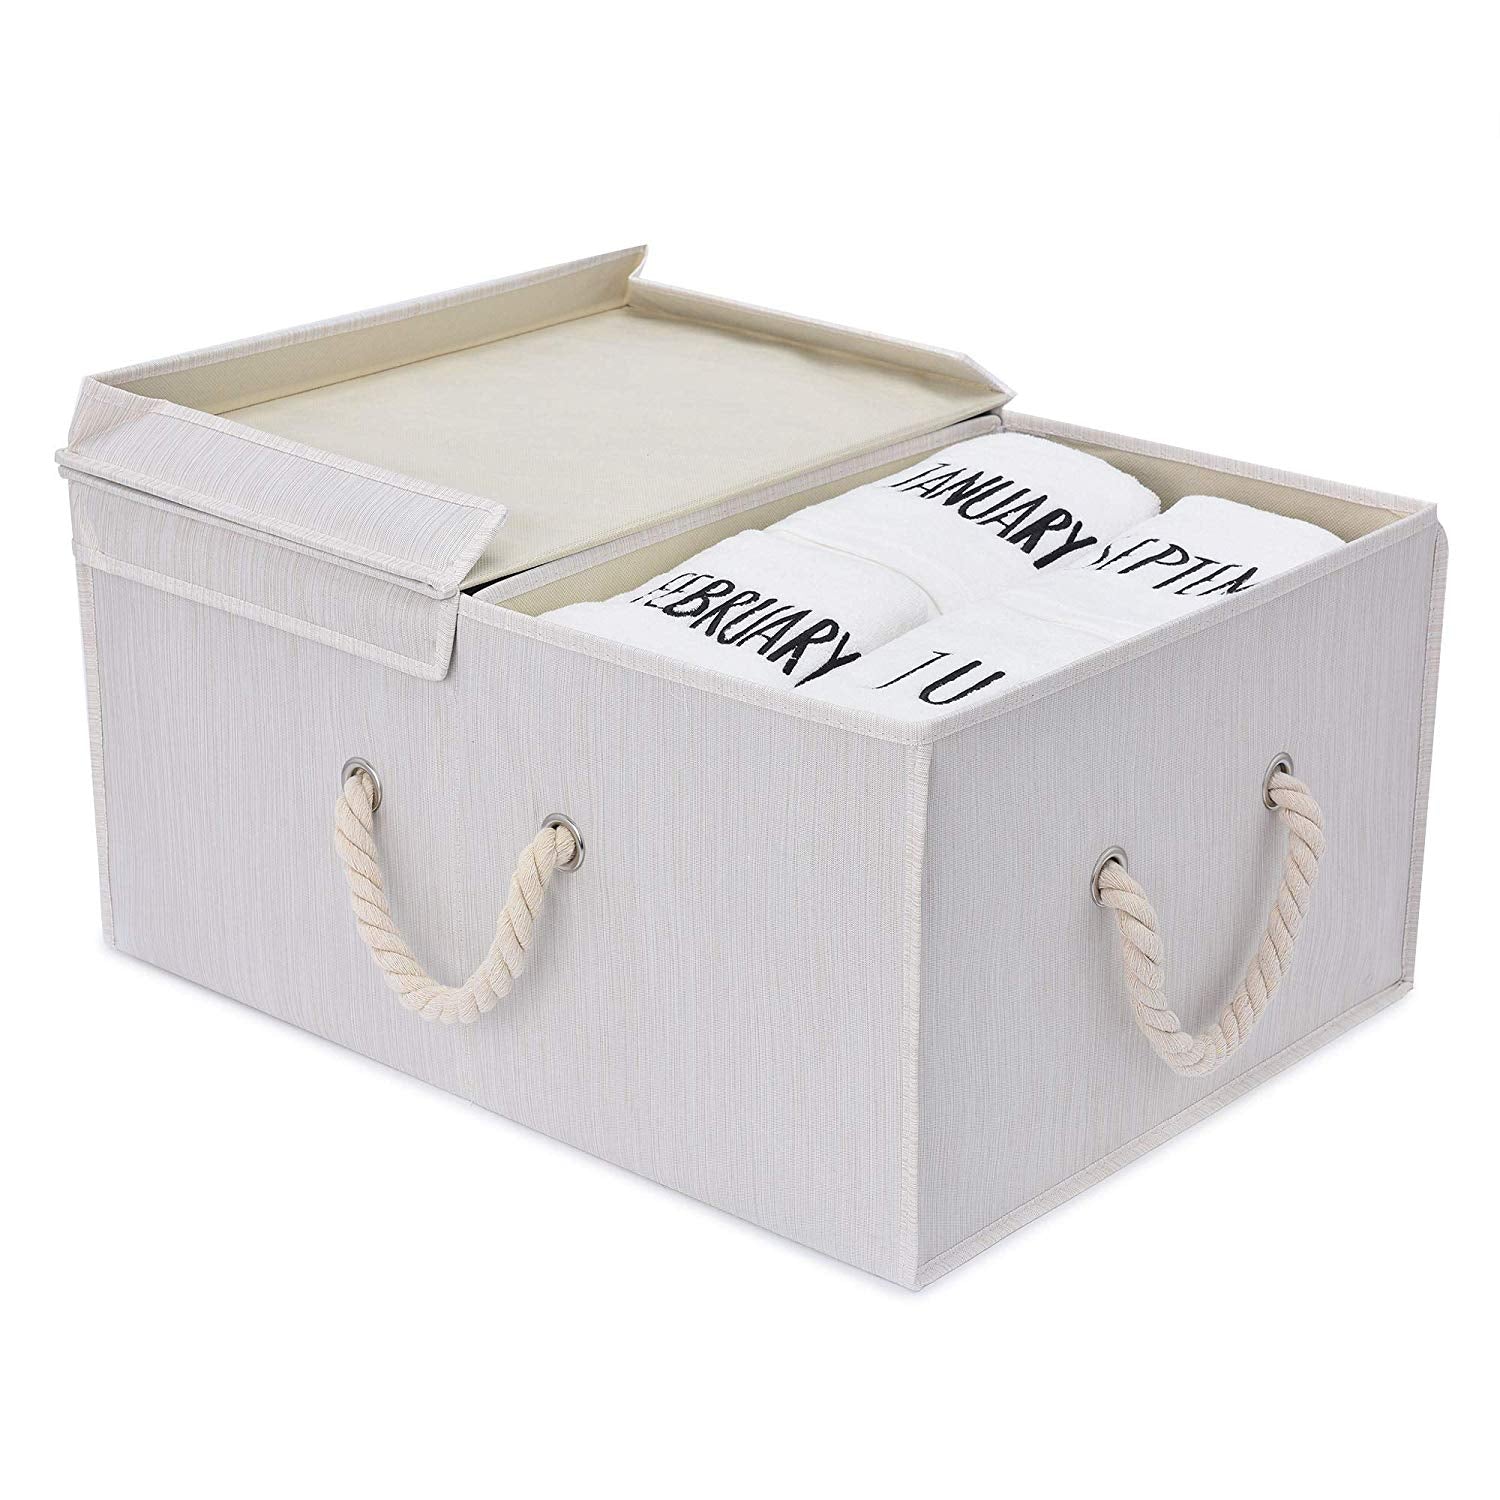 StorageWorks Storage Box with Lid and Strong Cotton Rope Handle, Foldable Clothes Closet Organizer, Mixture White, Bamboo Style, Jumbo, 65L Huge Capacity